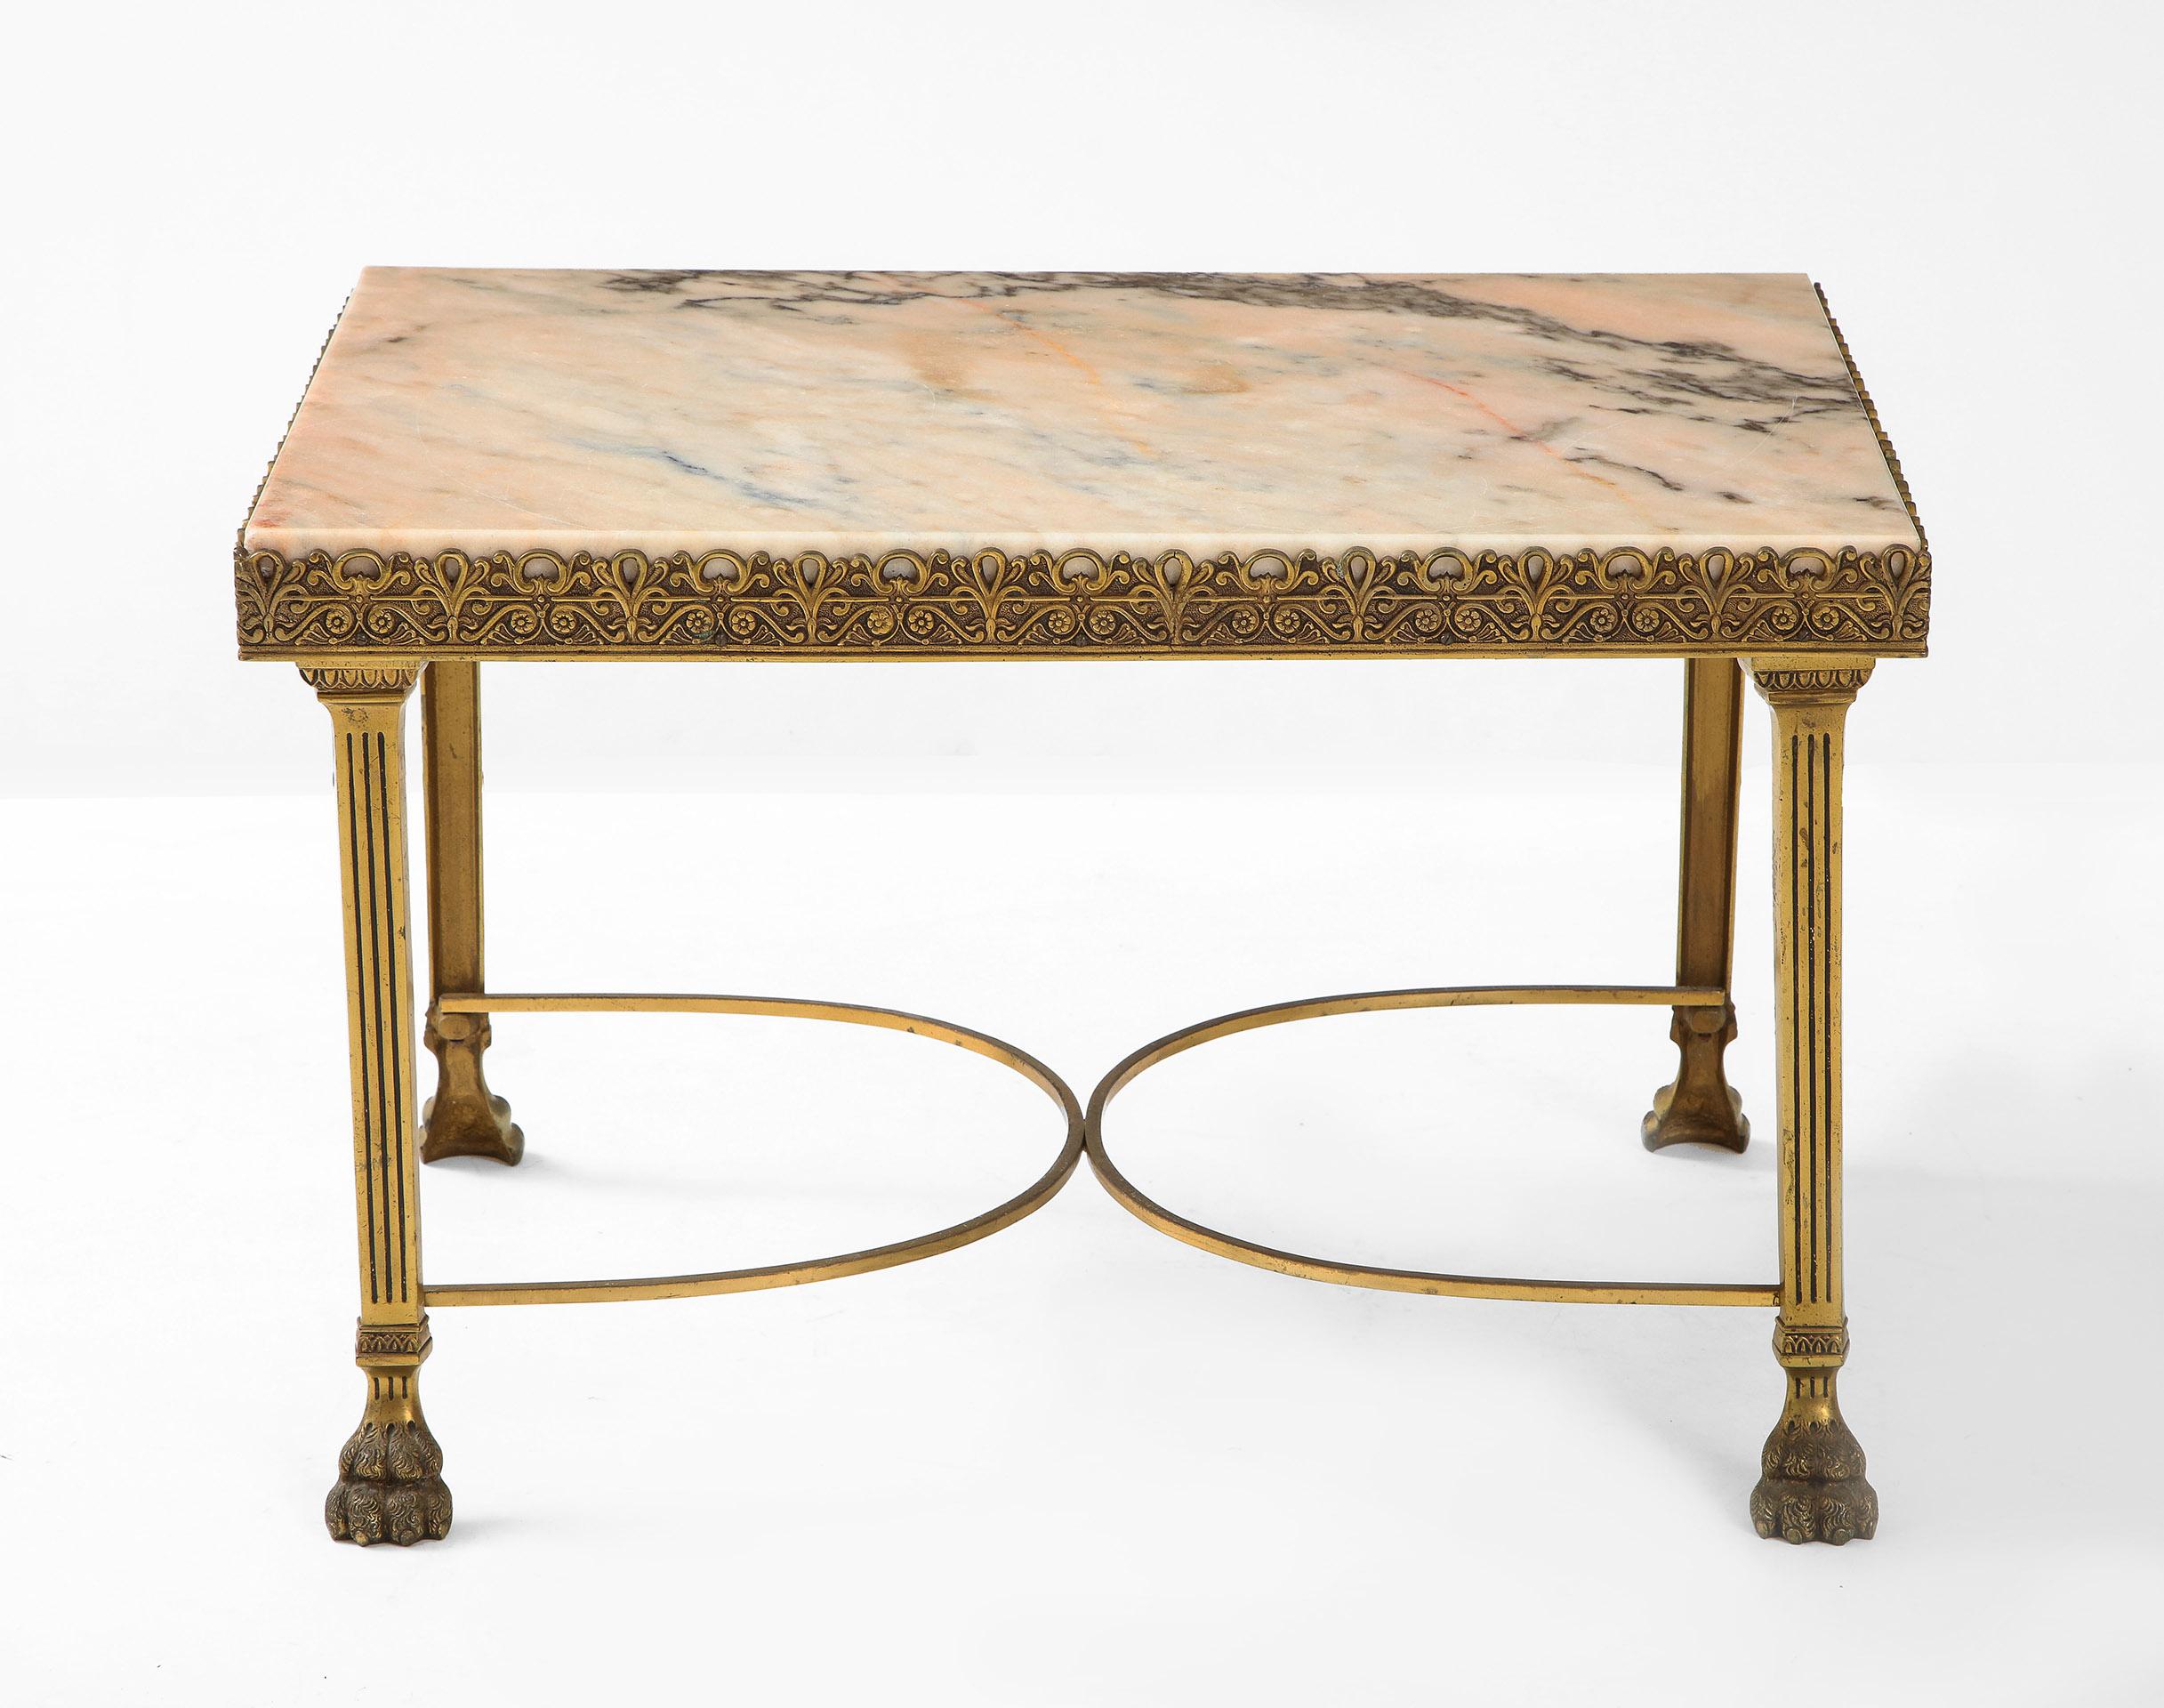 The inset marble top with an embossed brass filigree frame supported by fluted column legs with cross stretcher and ending in lion paw feet.